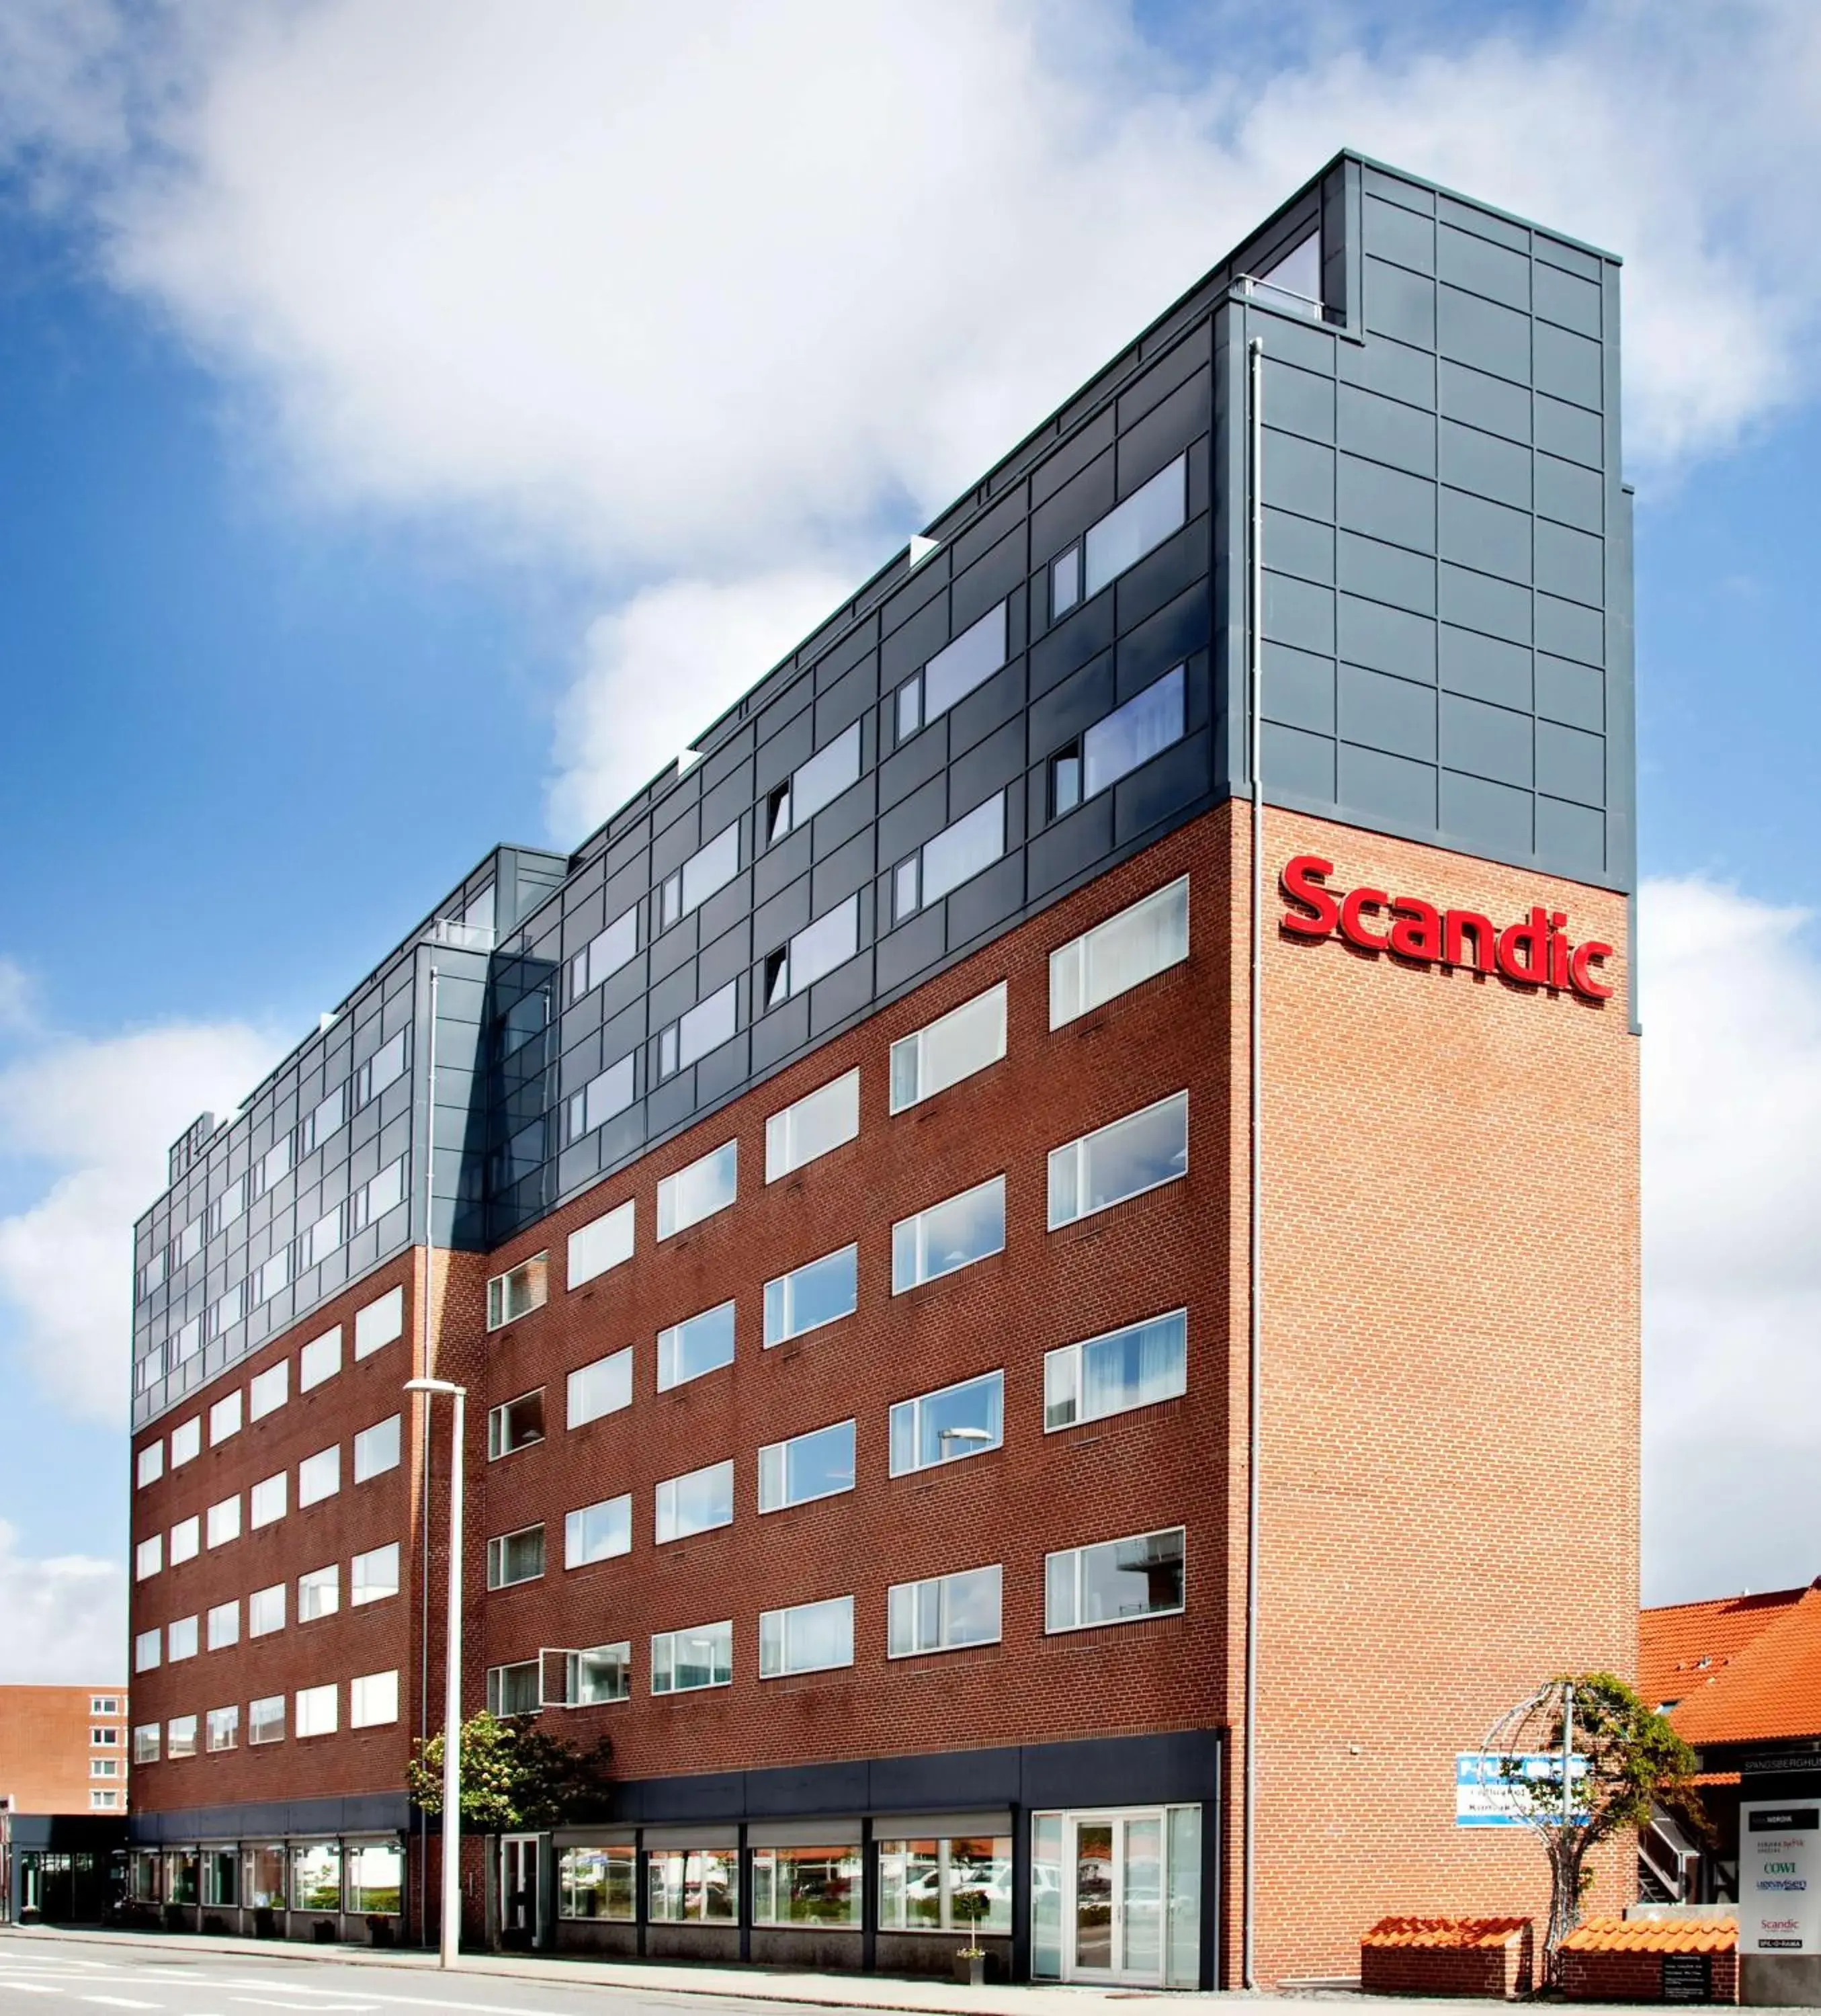 Property Building in Scandic Olympic